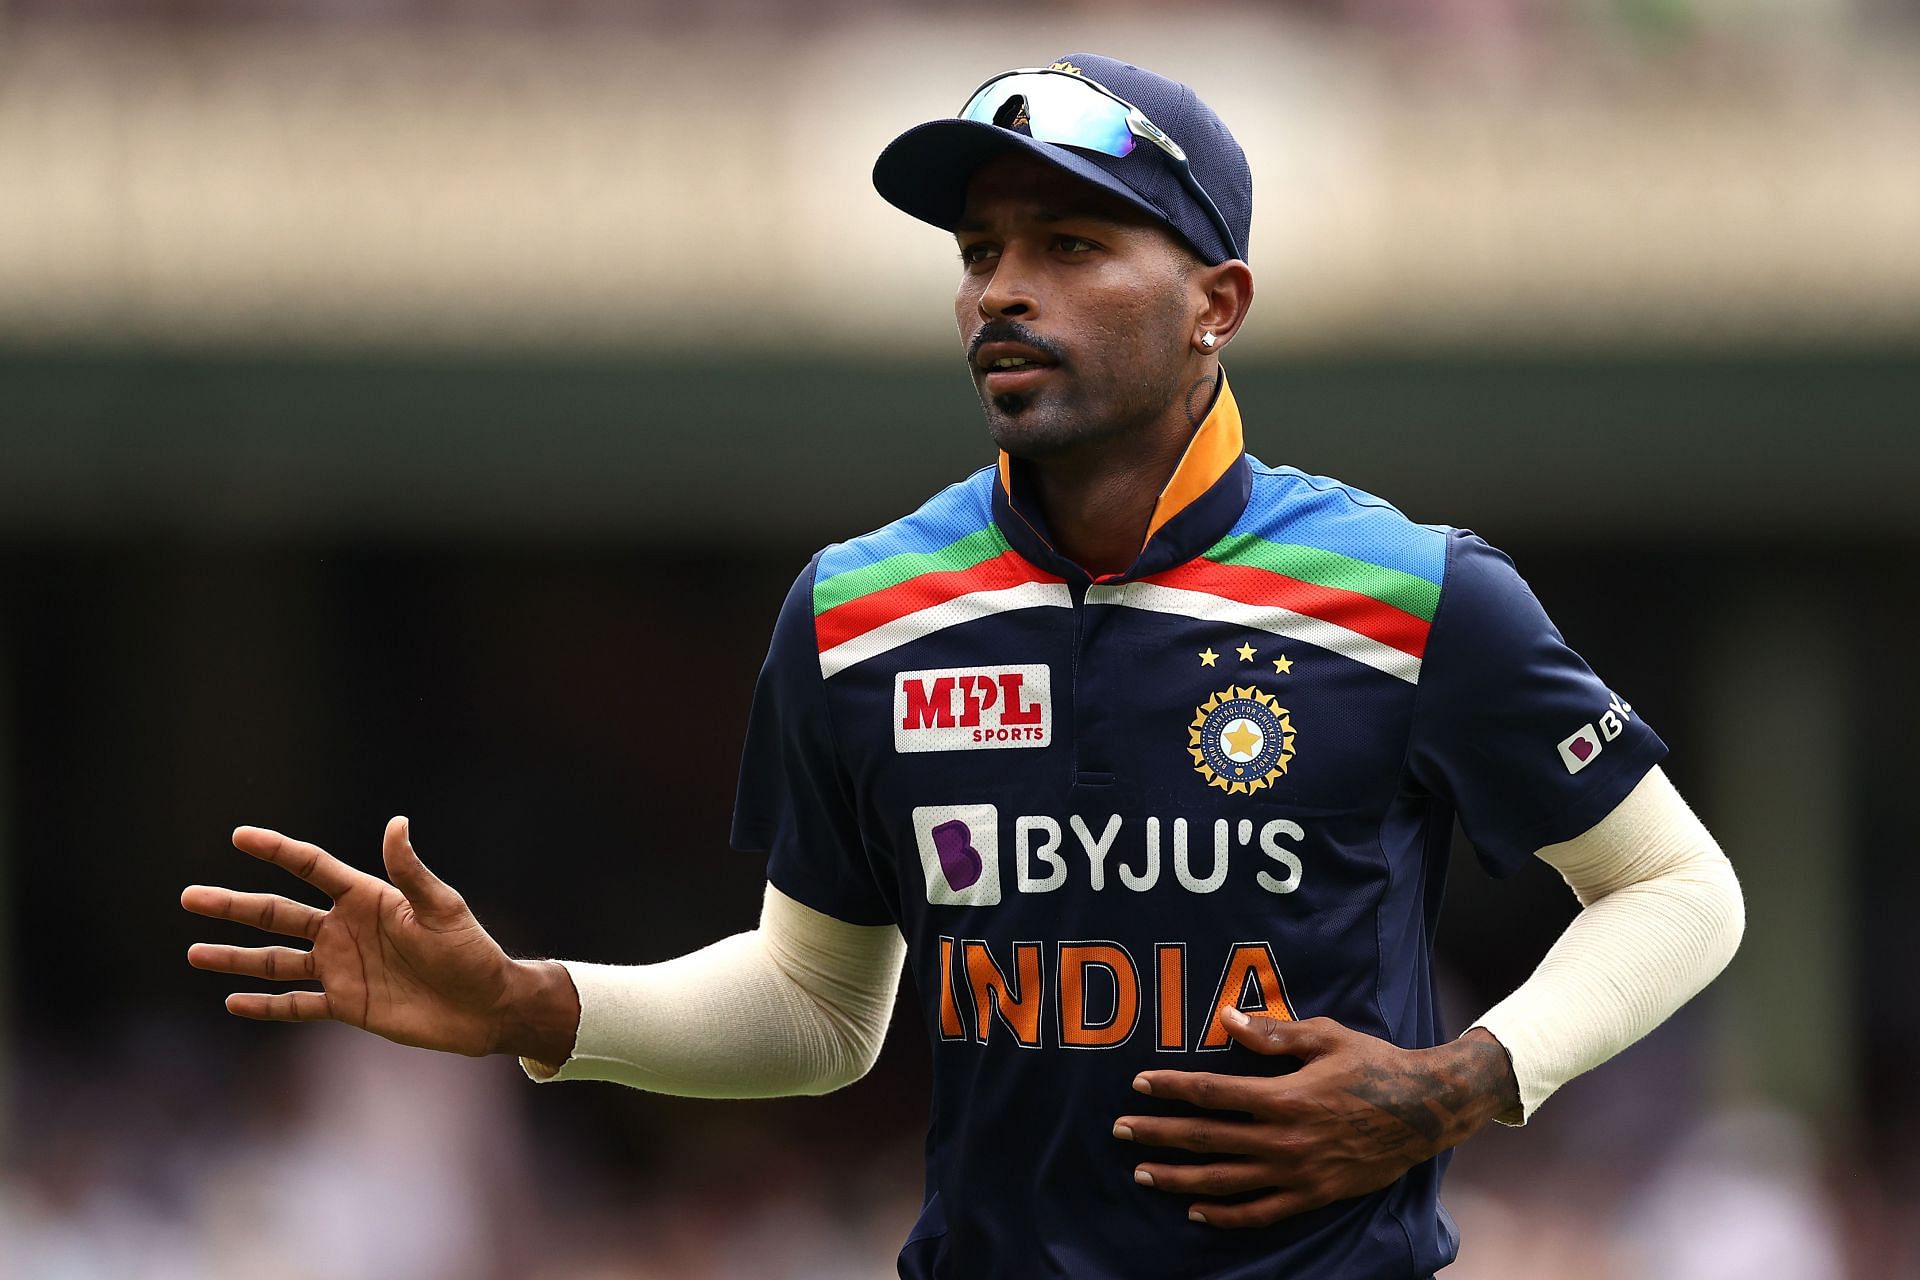 Hardik Pandya has evolved into the perfect all-rounder for India